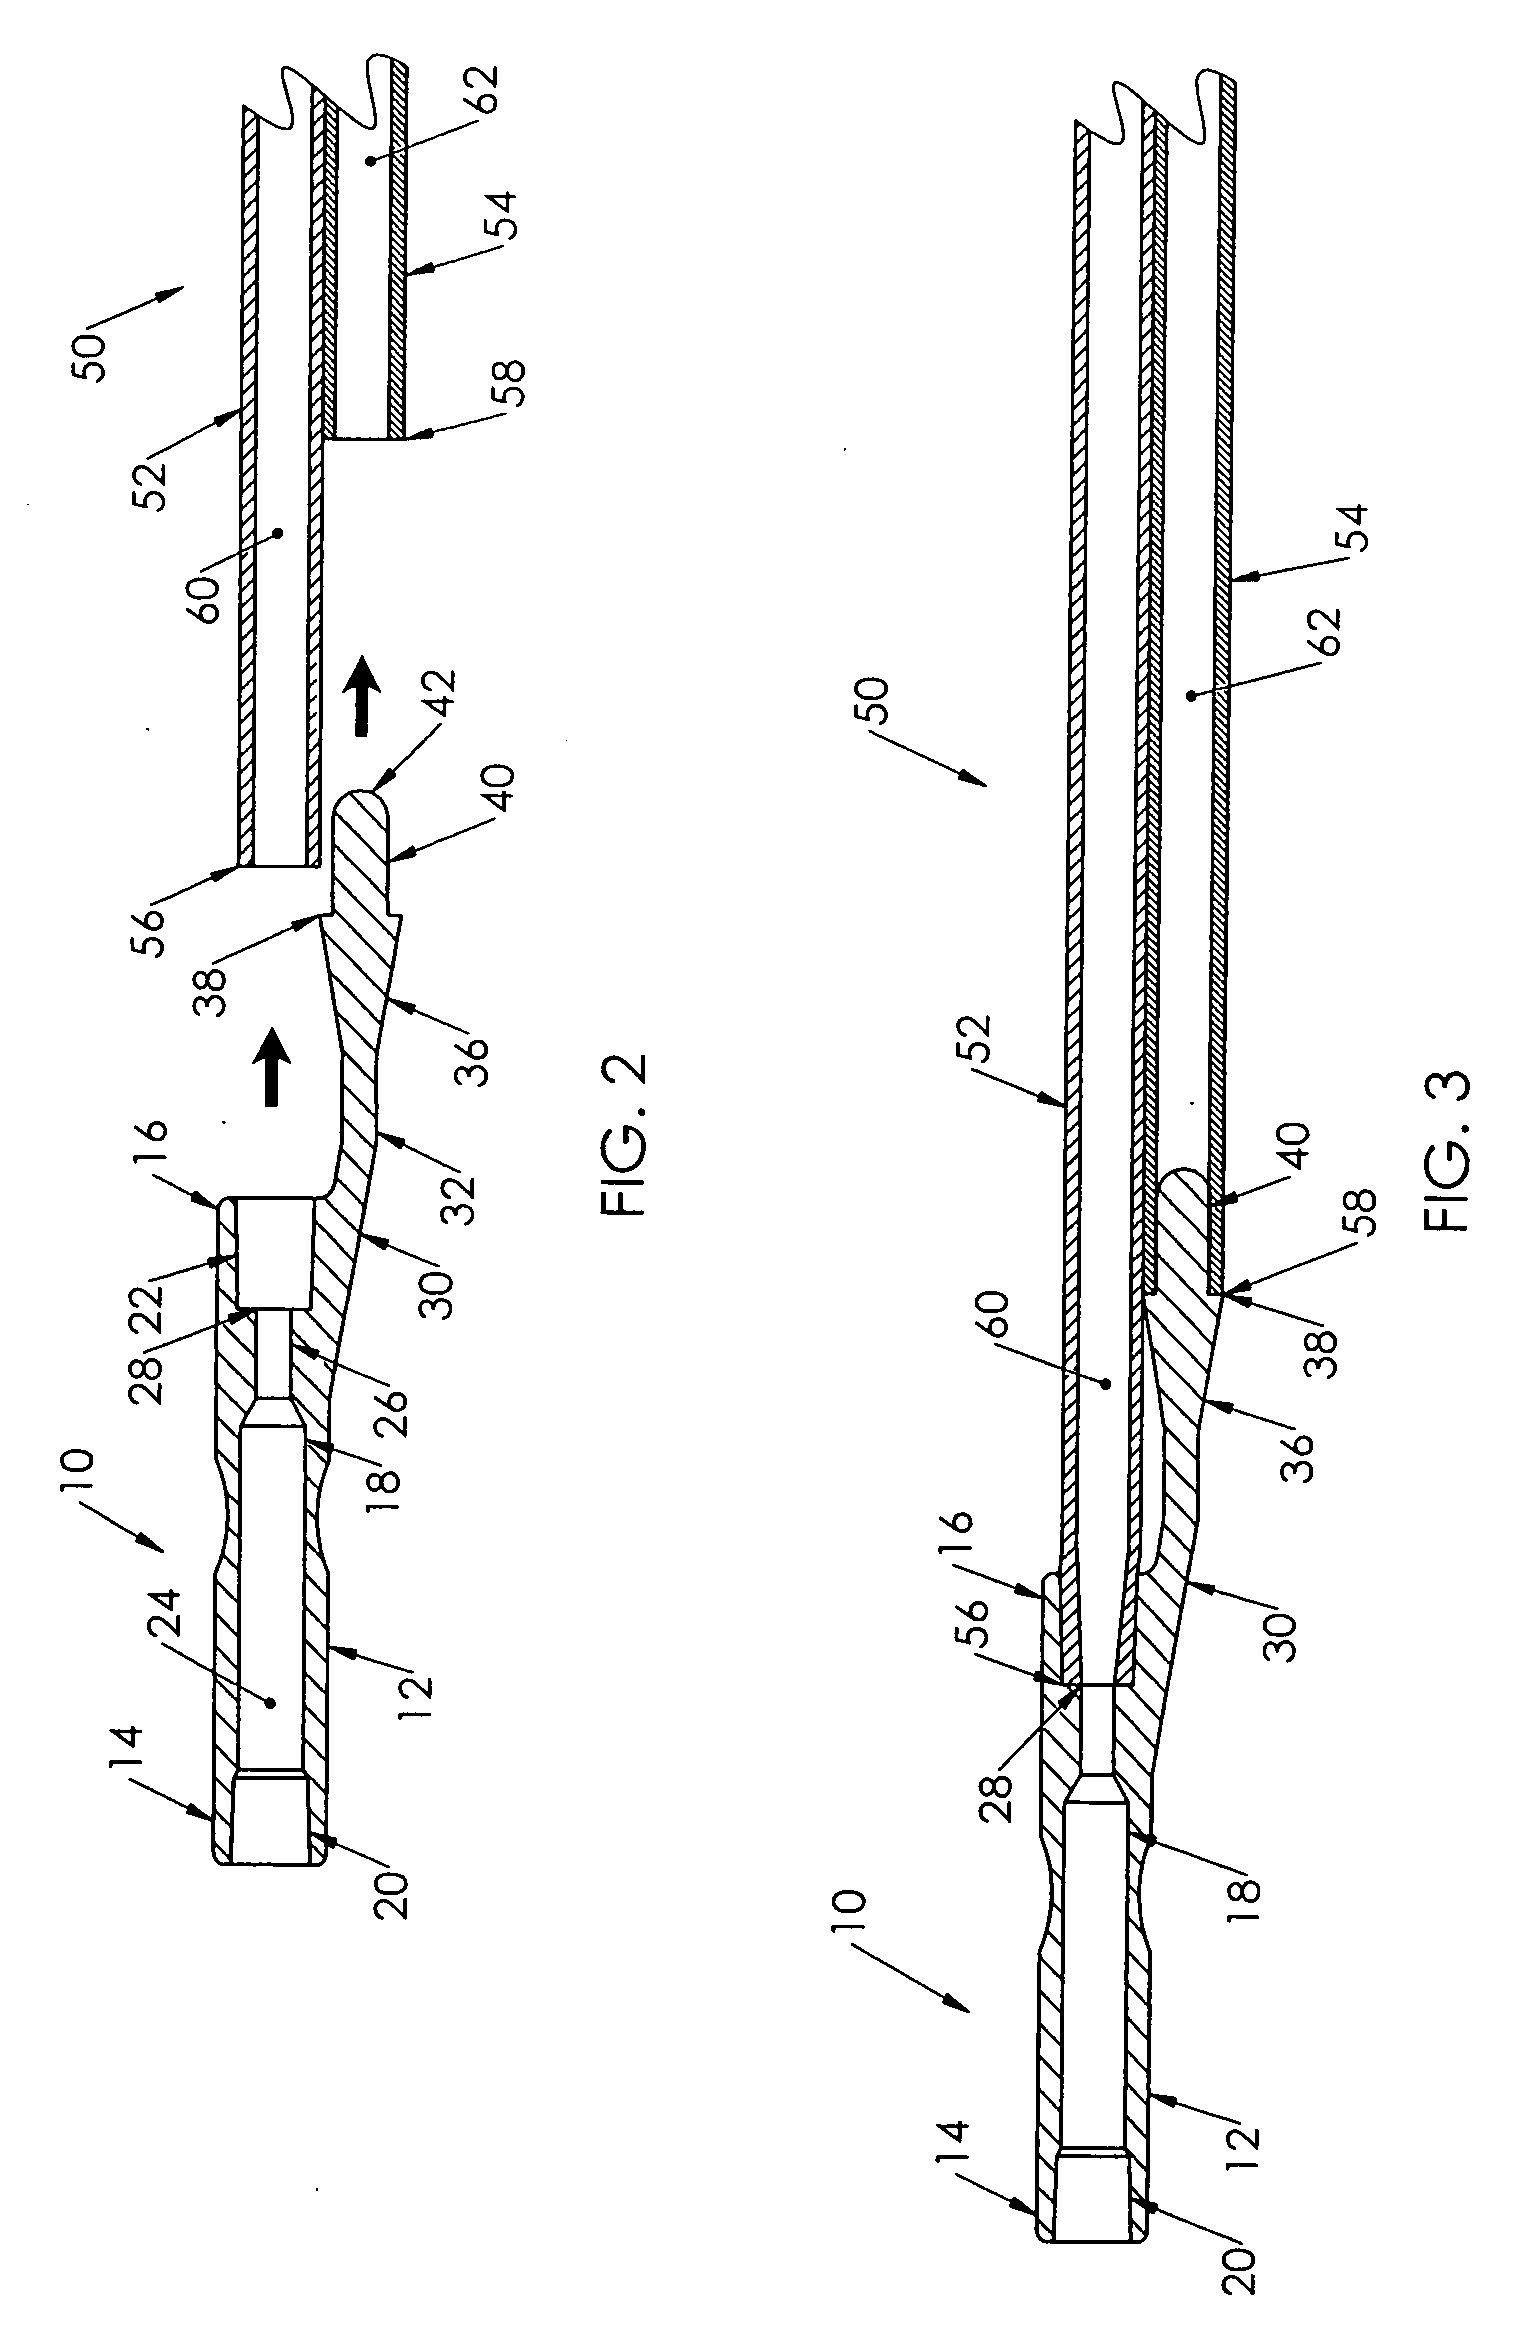 Catheter tunneler adapter and methods of assembly to a catheter and use